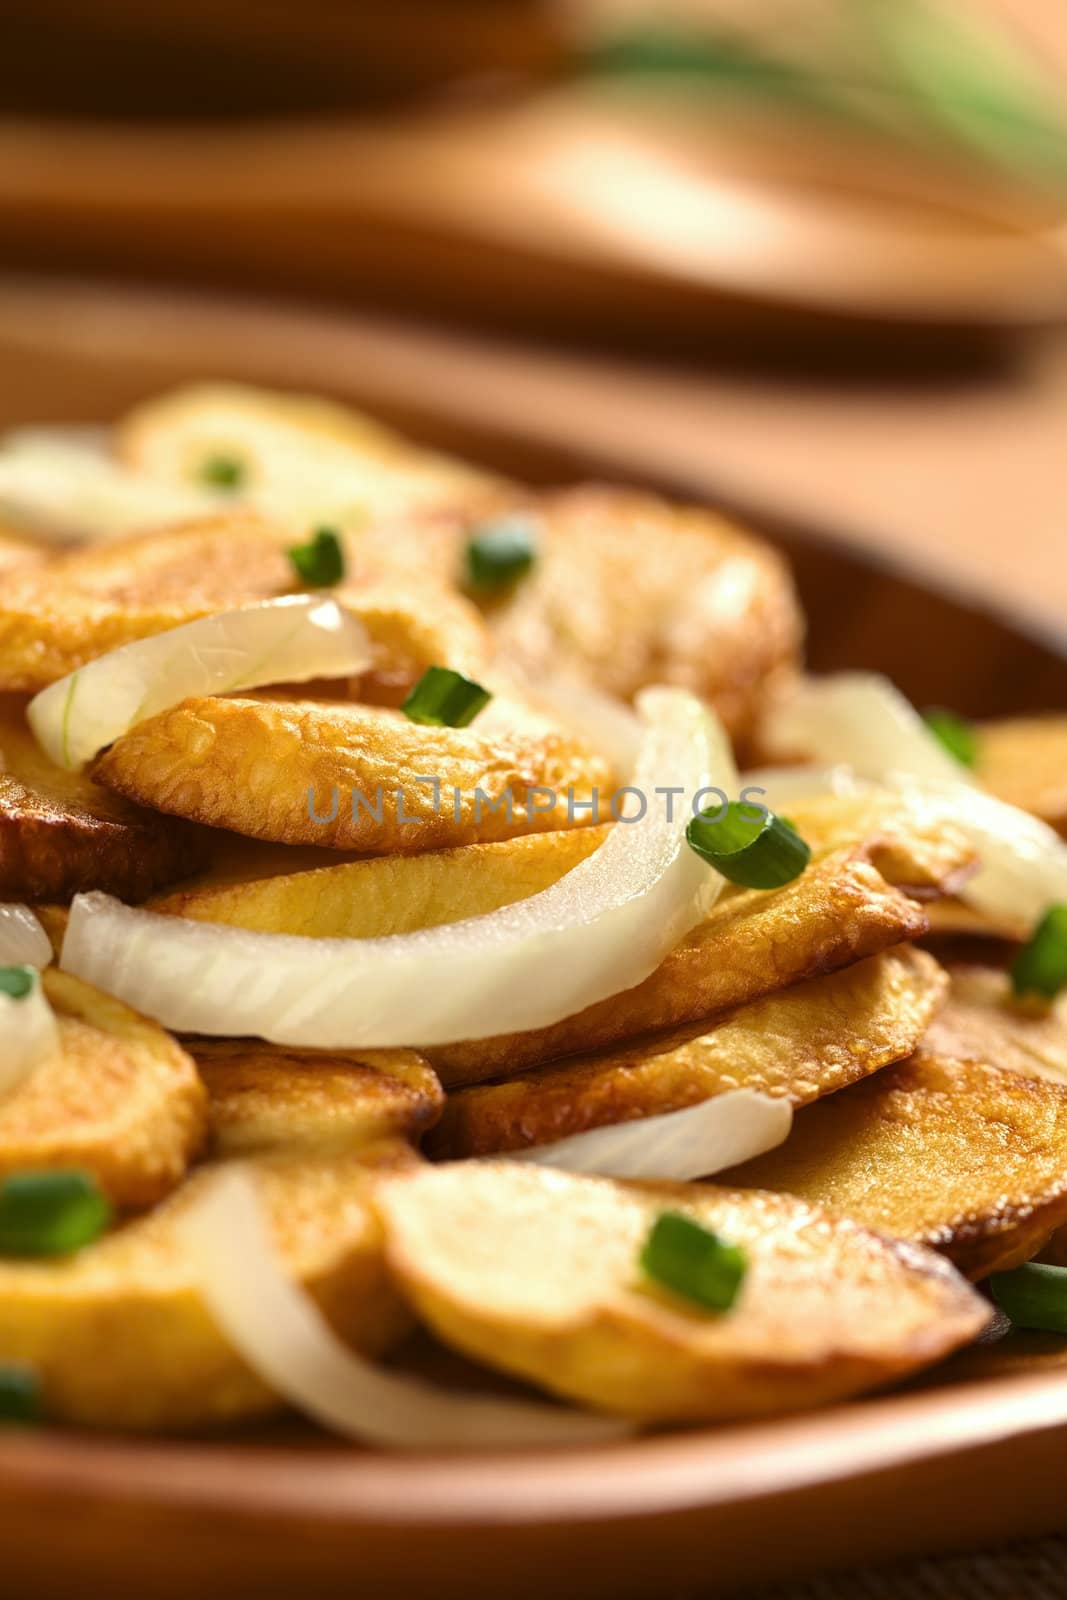 Fresh homemade crispy fried potato slices with fried onion and scallion on wooden plate (Selective Focus, Focus on the front of the potato slice on top)